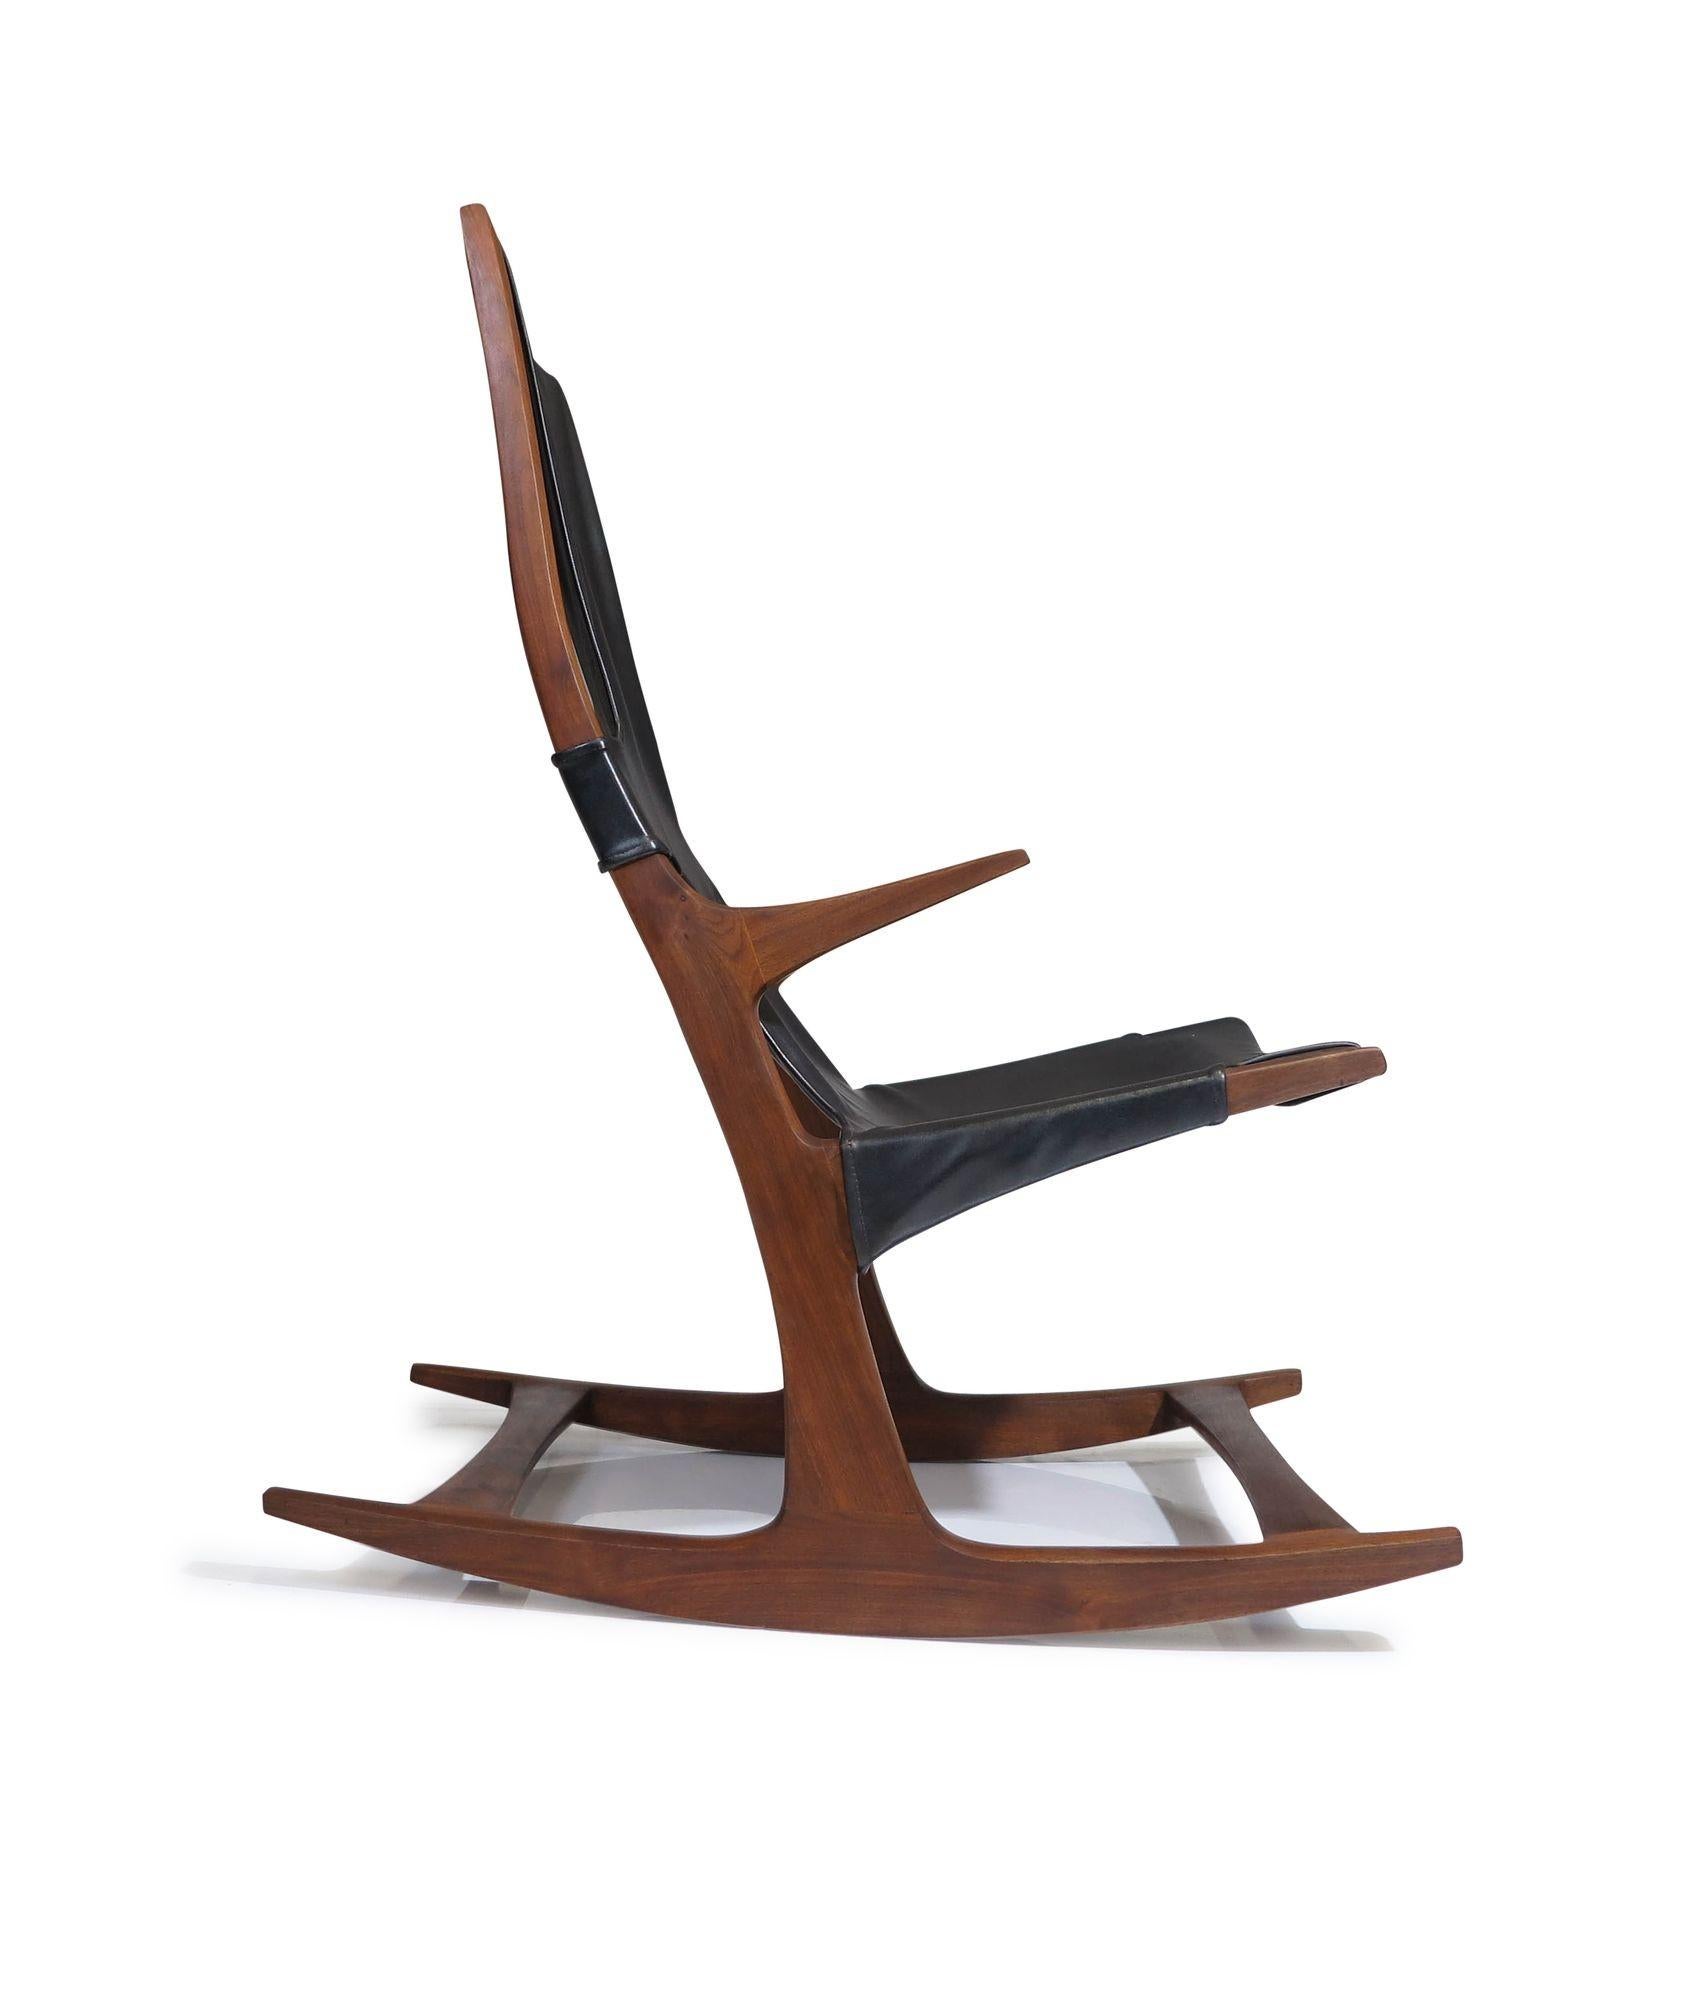 Oiled Sculptural California Studio Craft Rocking Chair For Sale